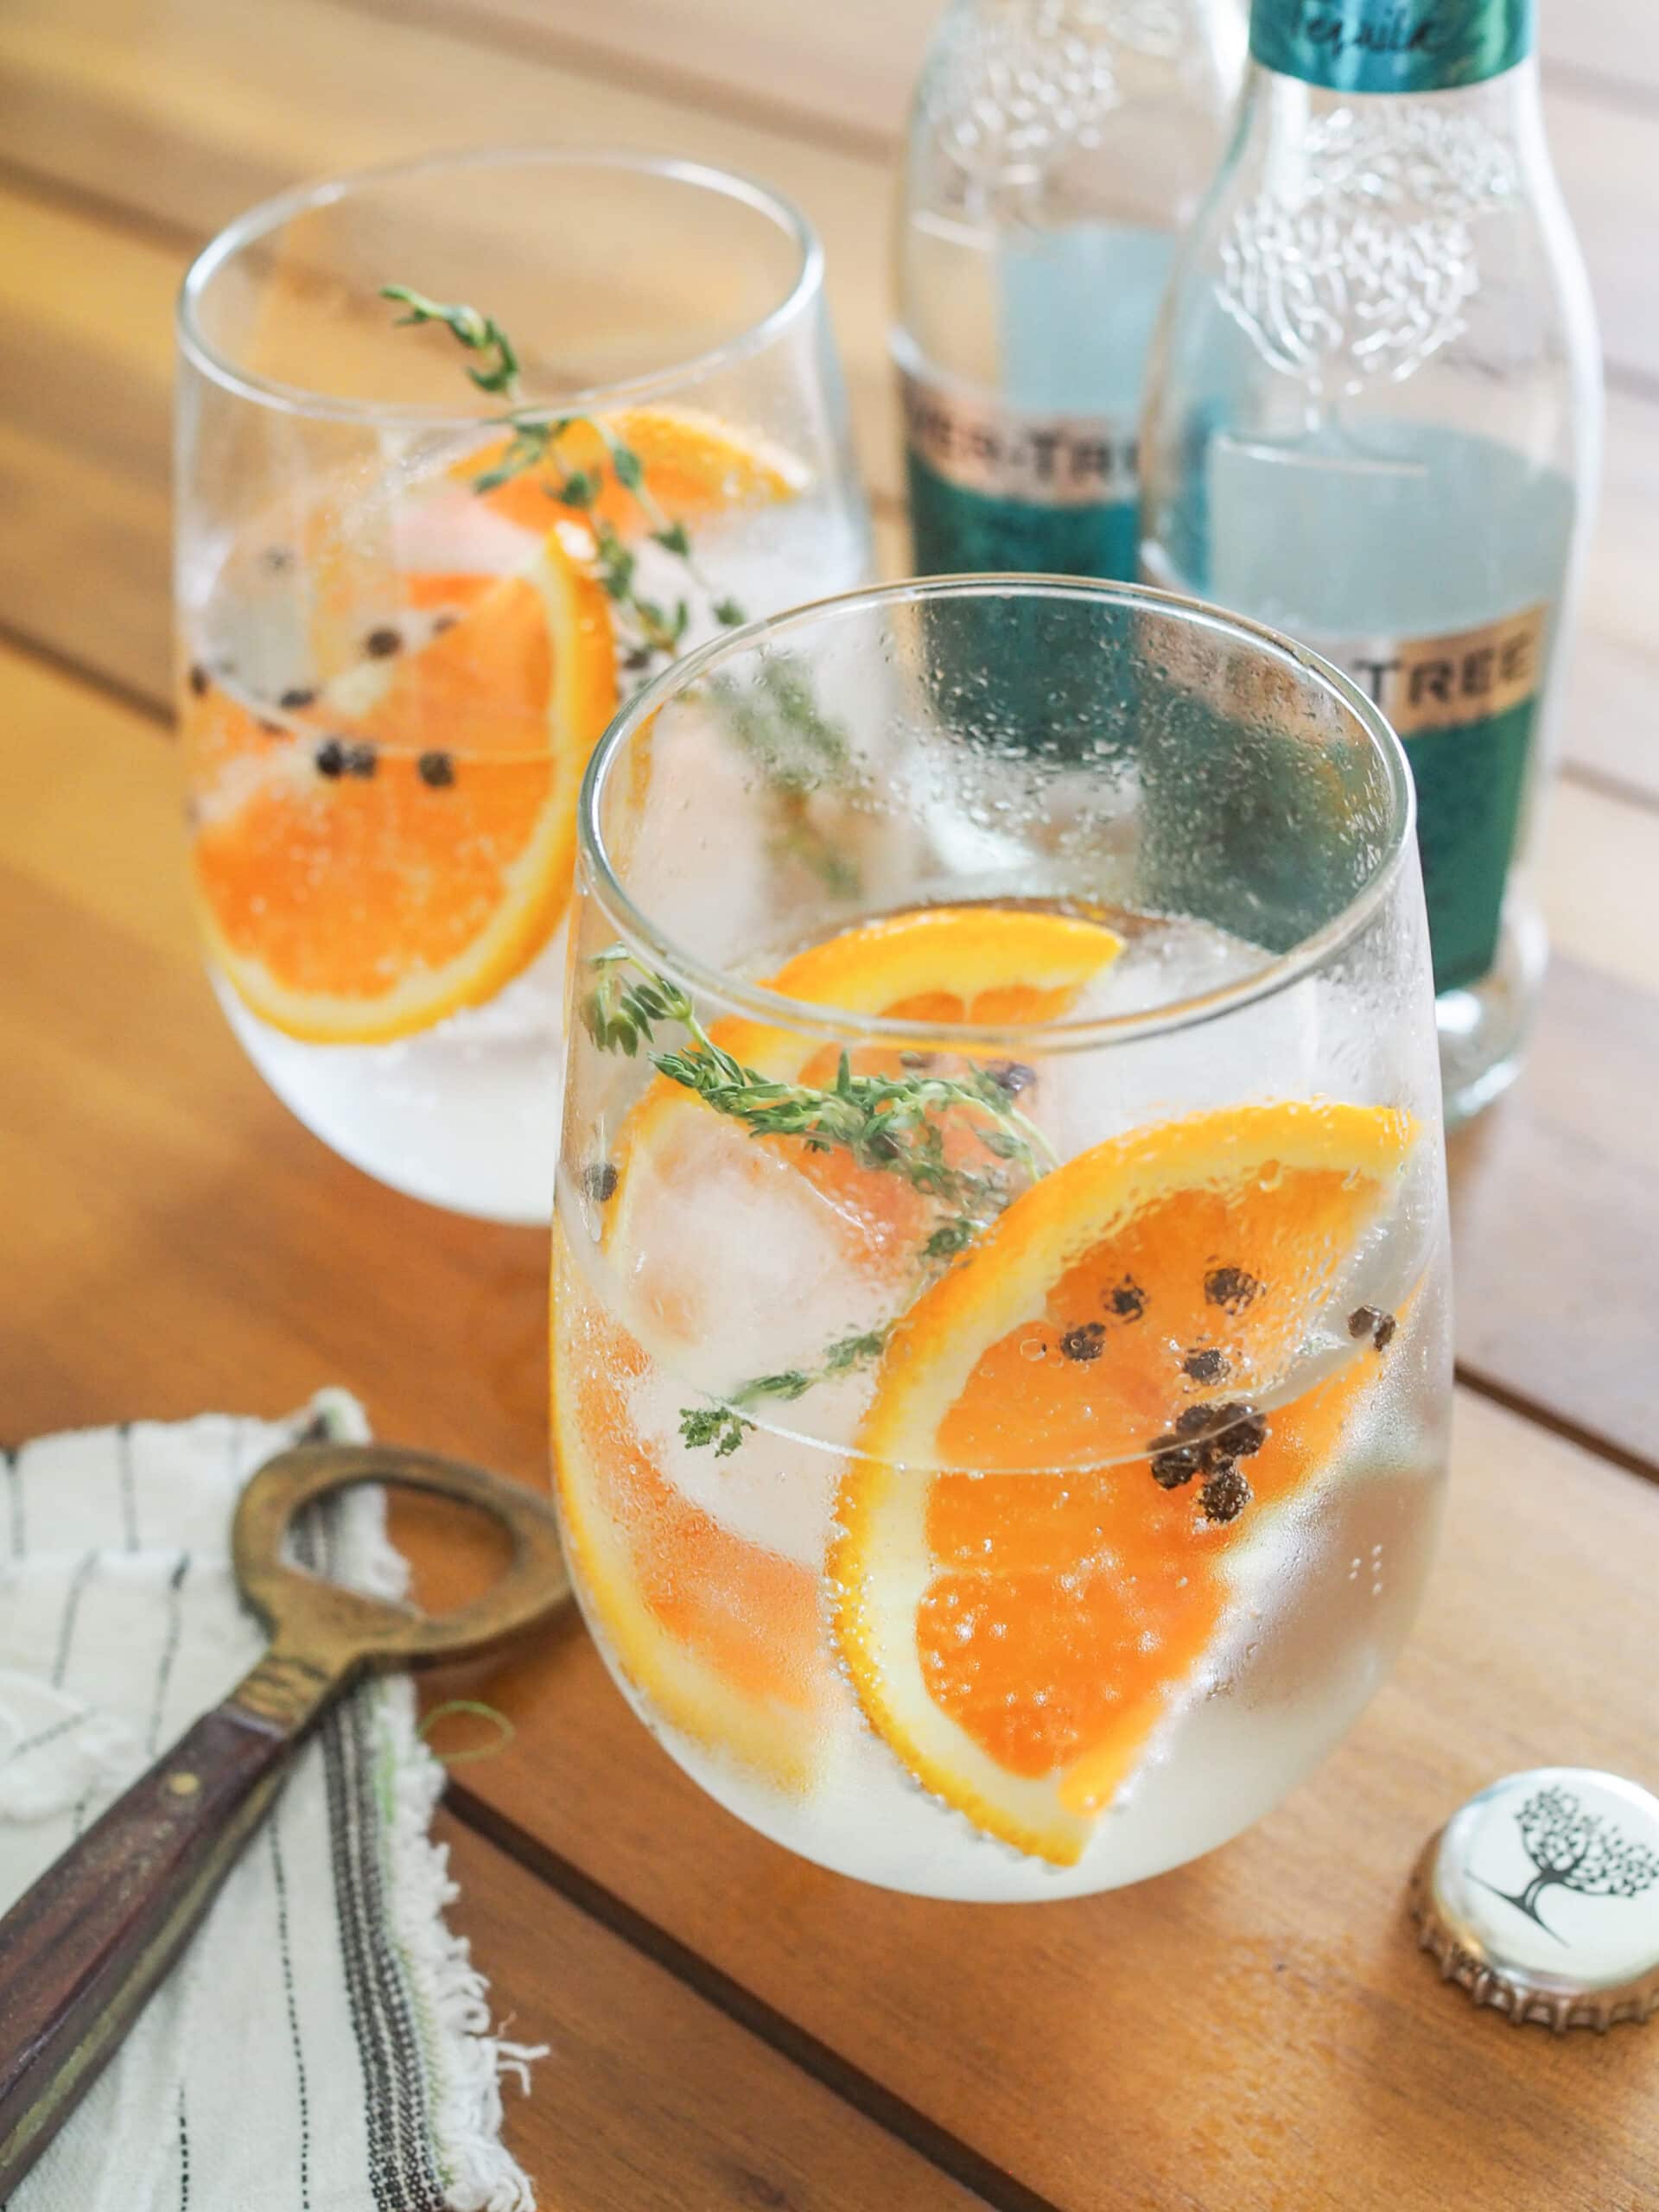 How to make the perfect gin & tonic